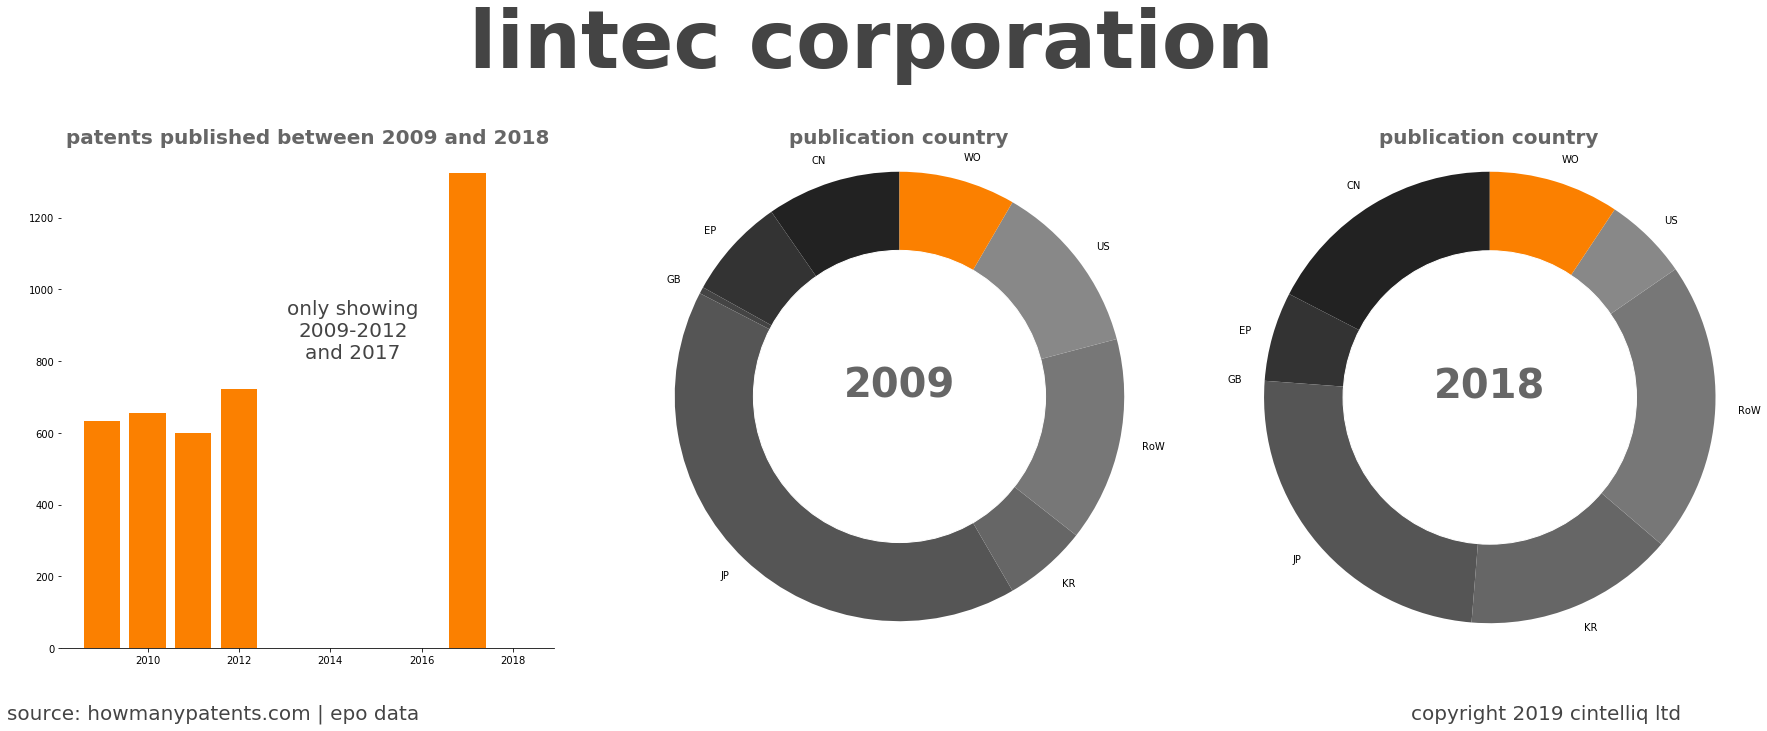 summary of patents for Lintec Corporation